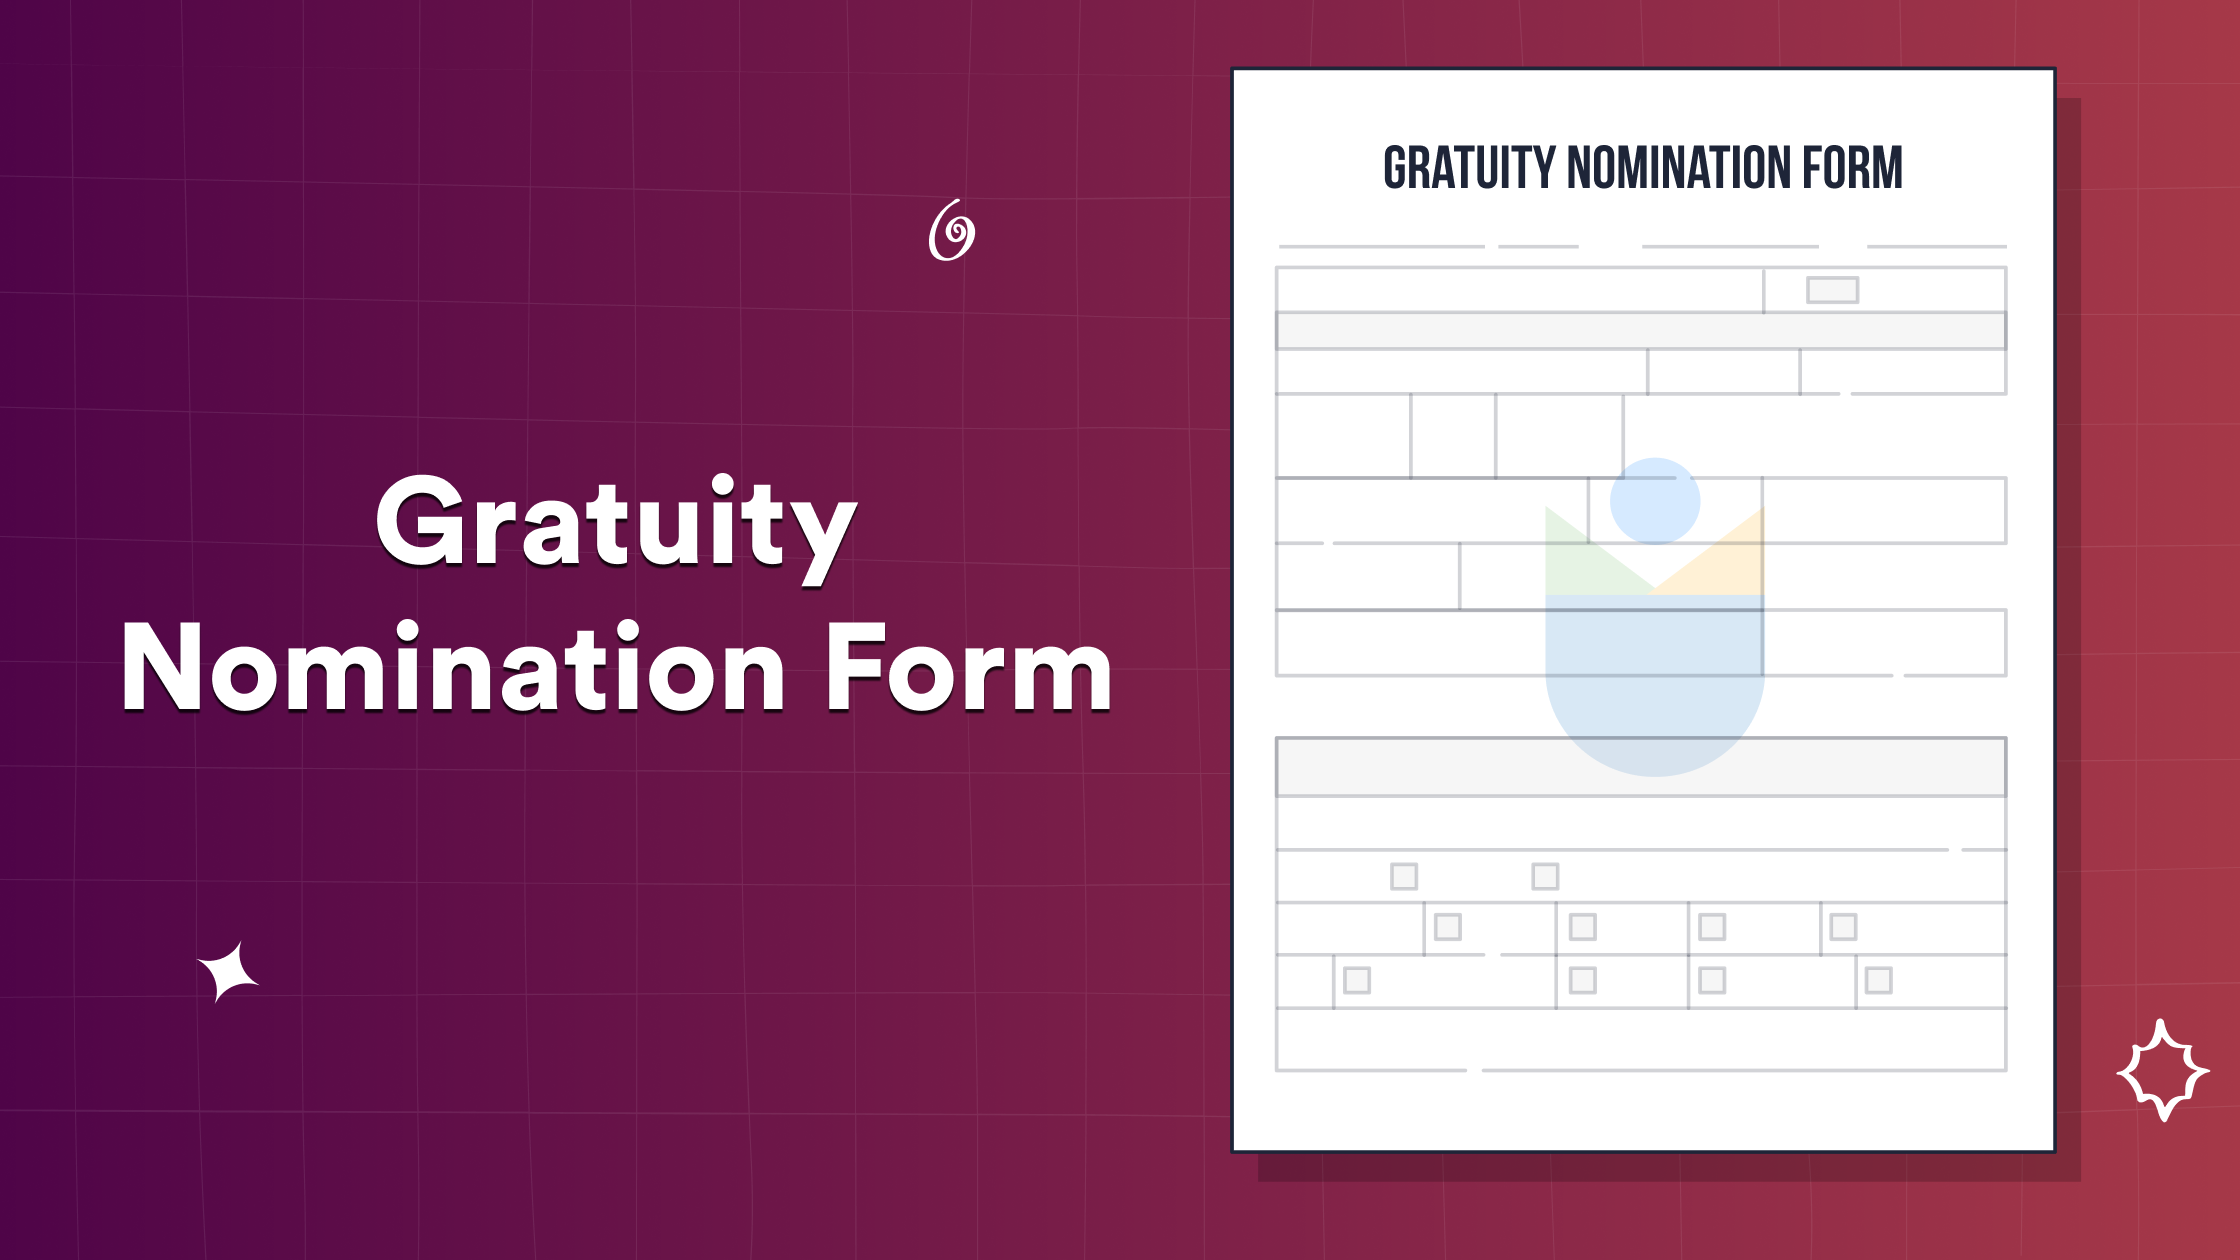 What Is Gratuity Nomination Form Detailed Information You Need Before You Make Nominee